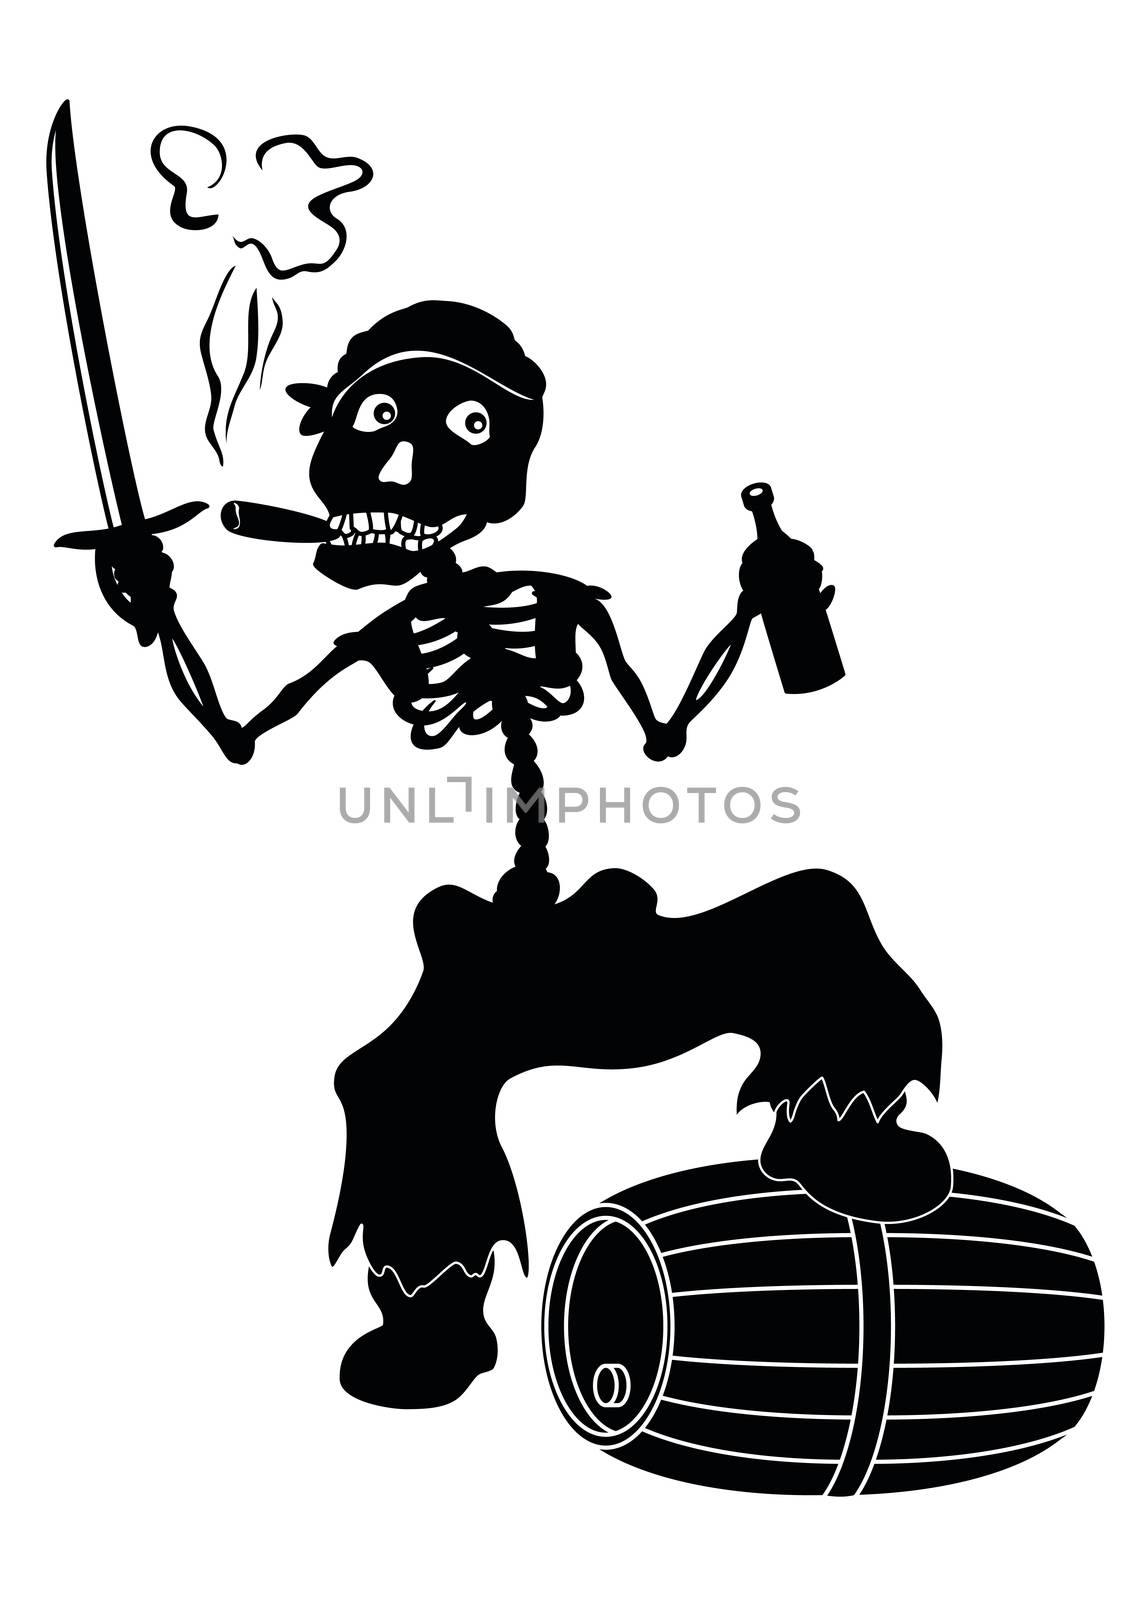 Jolly Roger skeleton, black silhouettes by alexcoolok